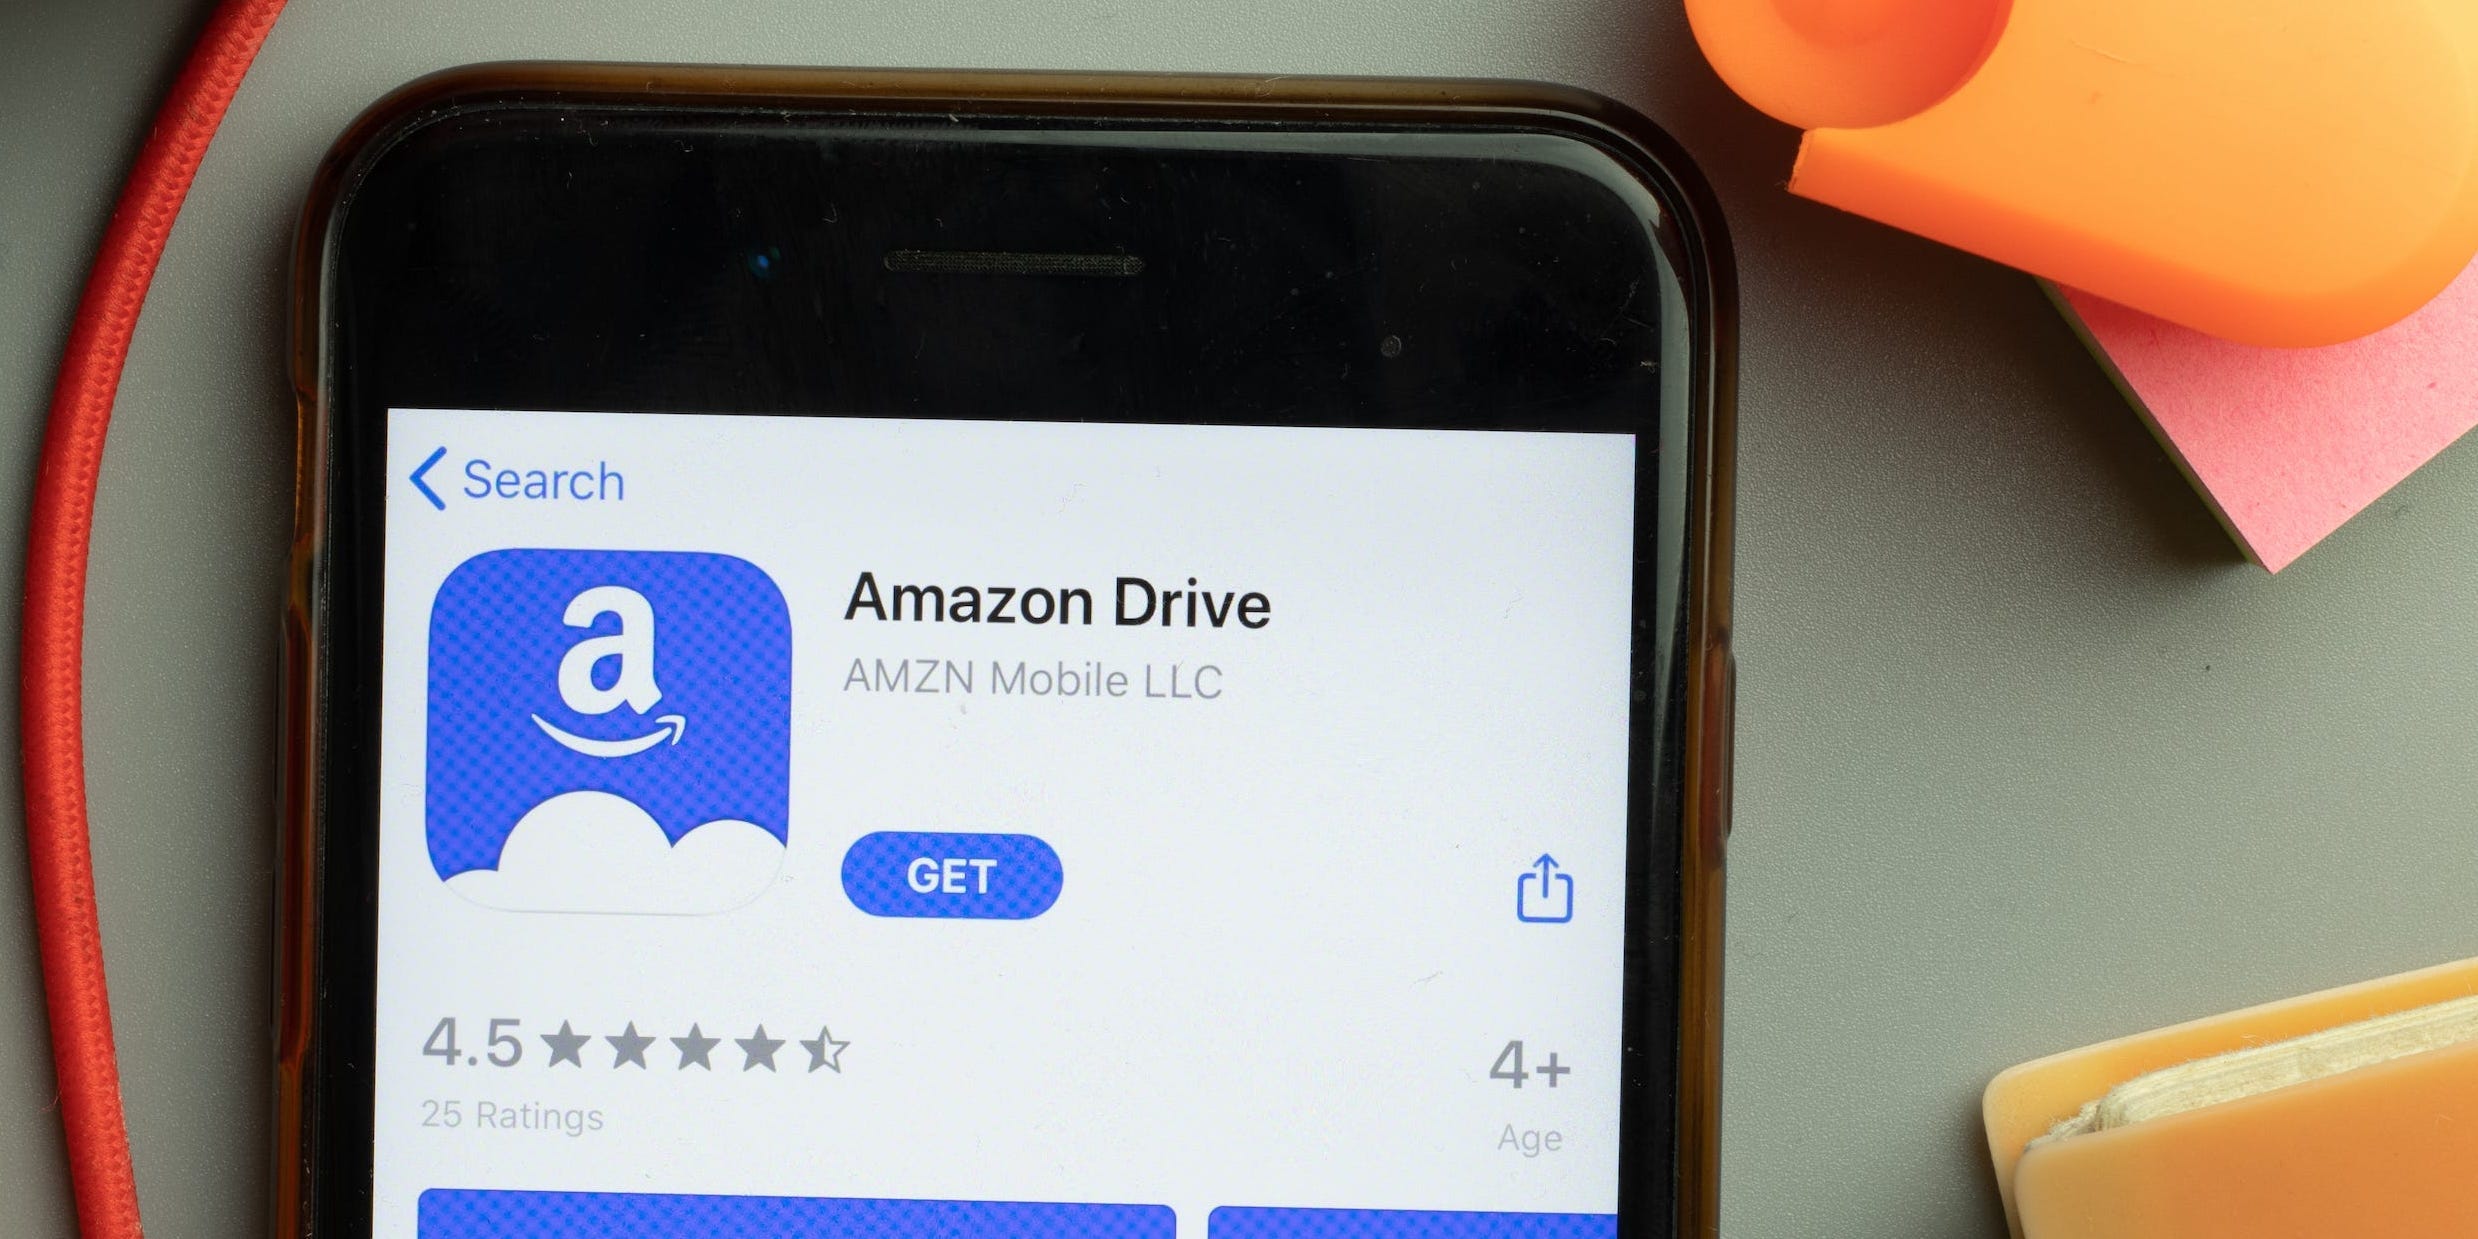 The Amazon Drive app displayed on an iPhone.